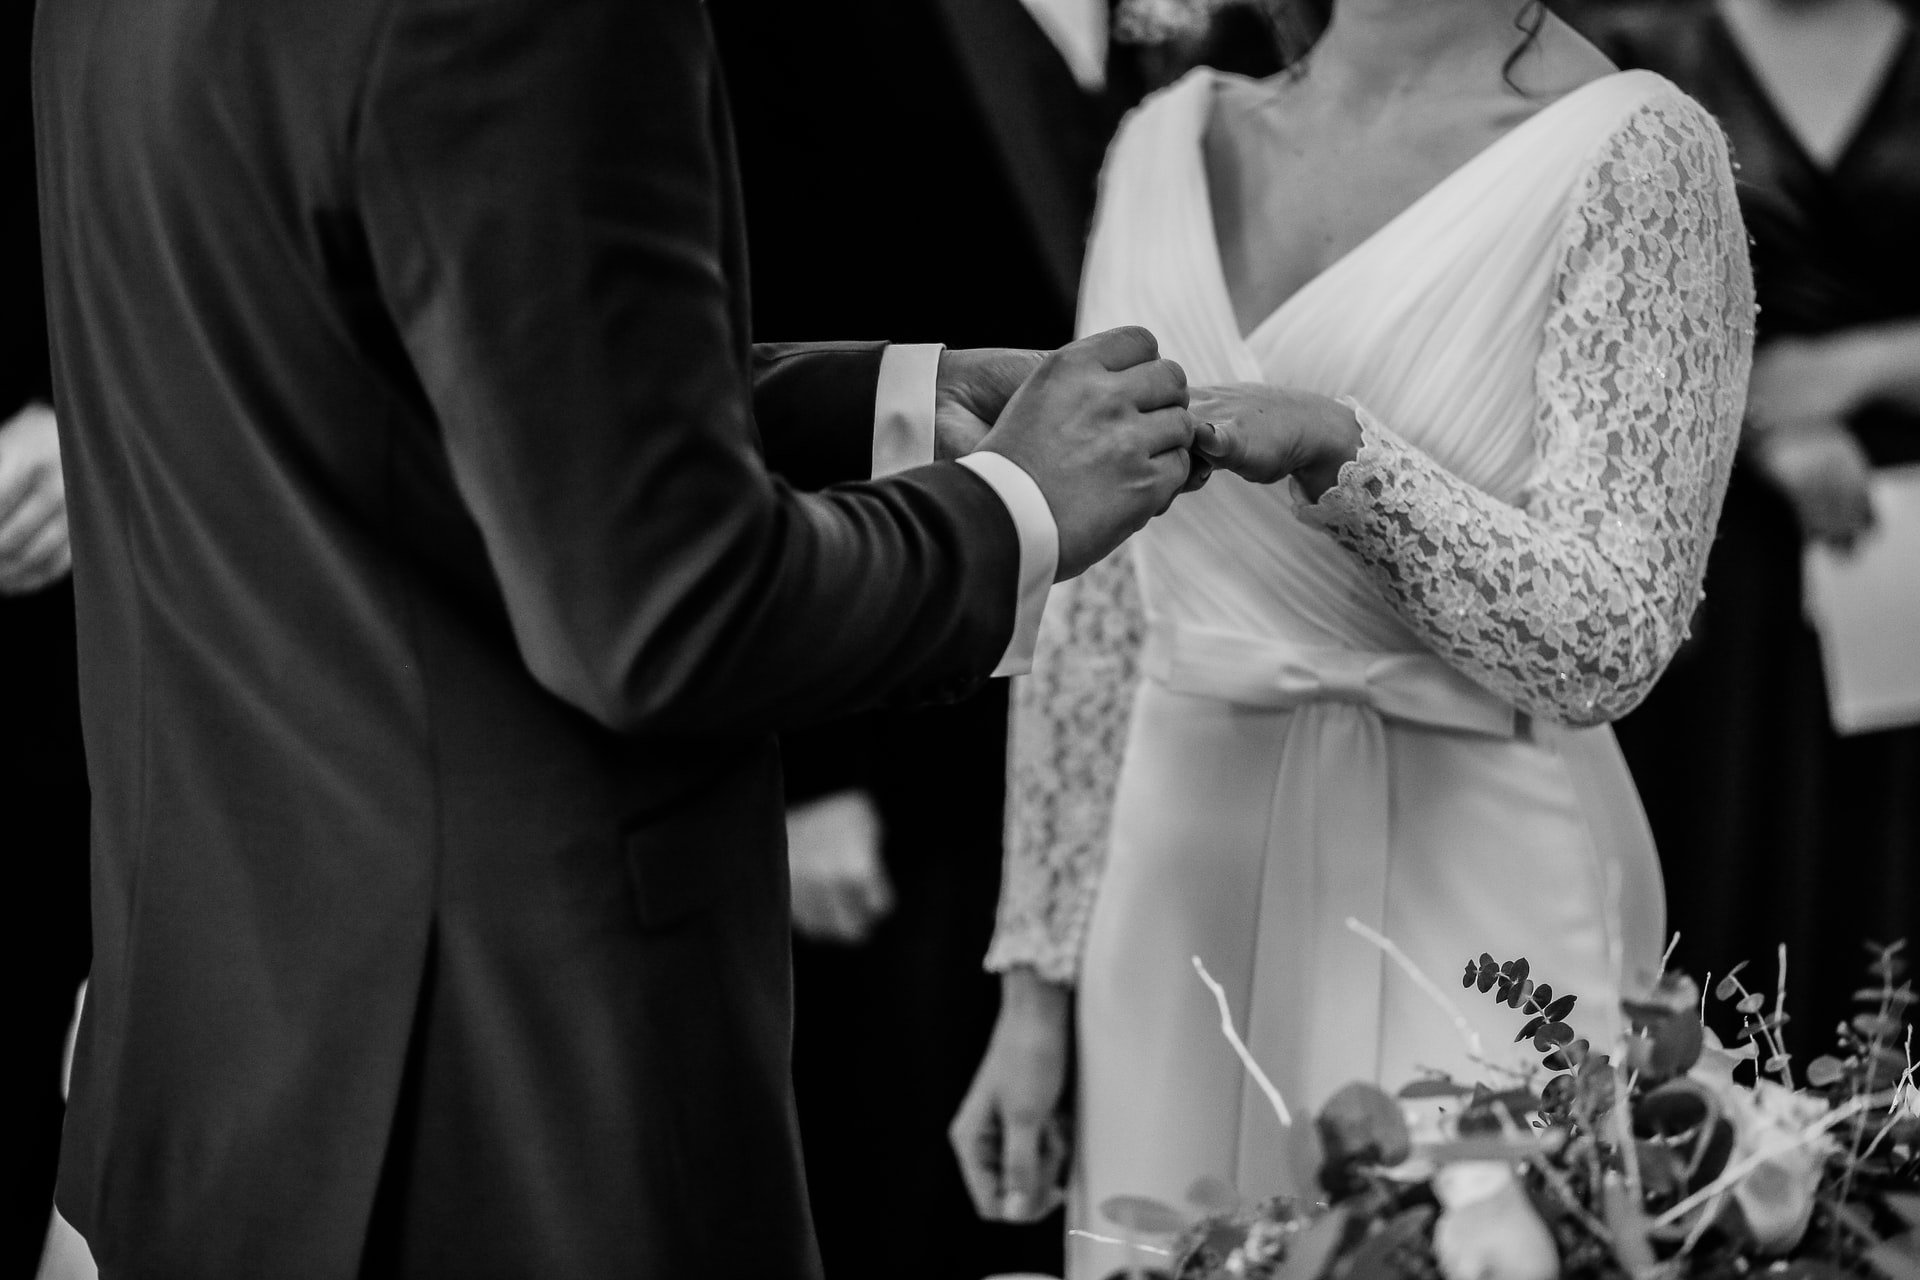 OP married his significant other | Source: Unsplash